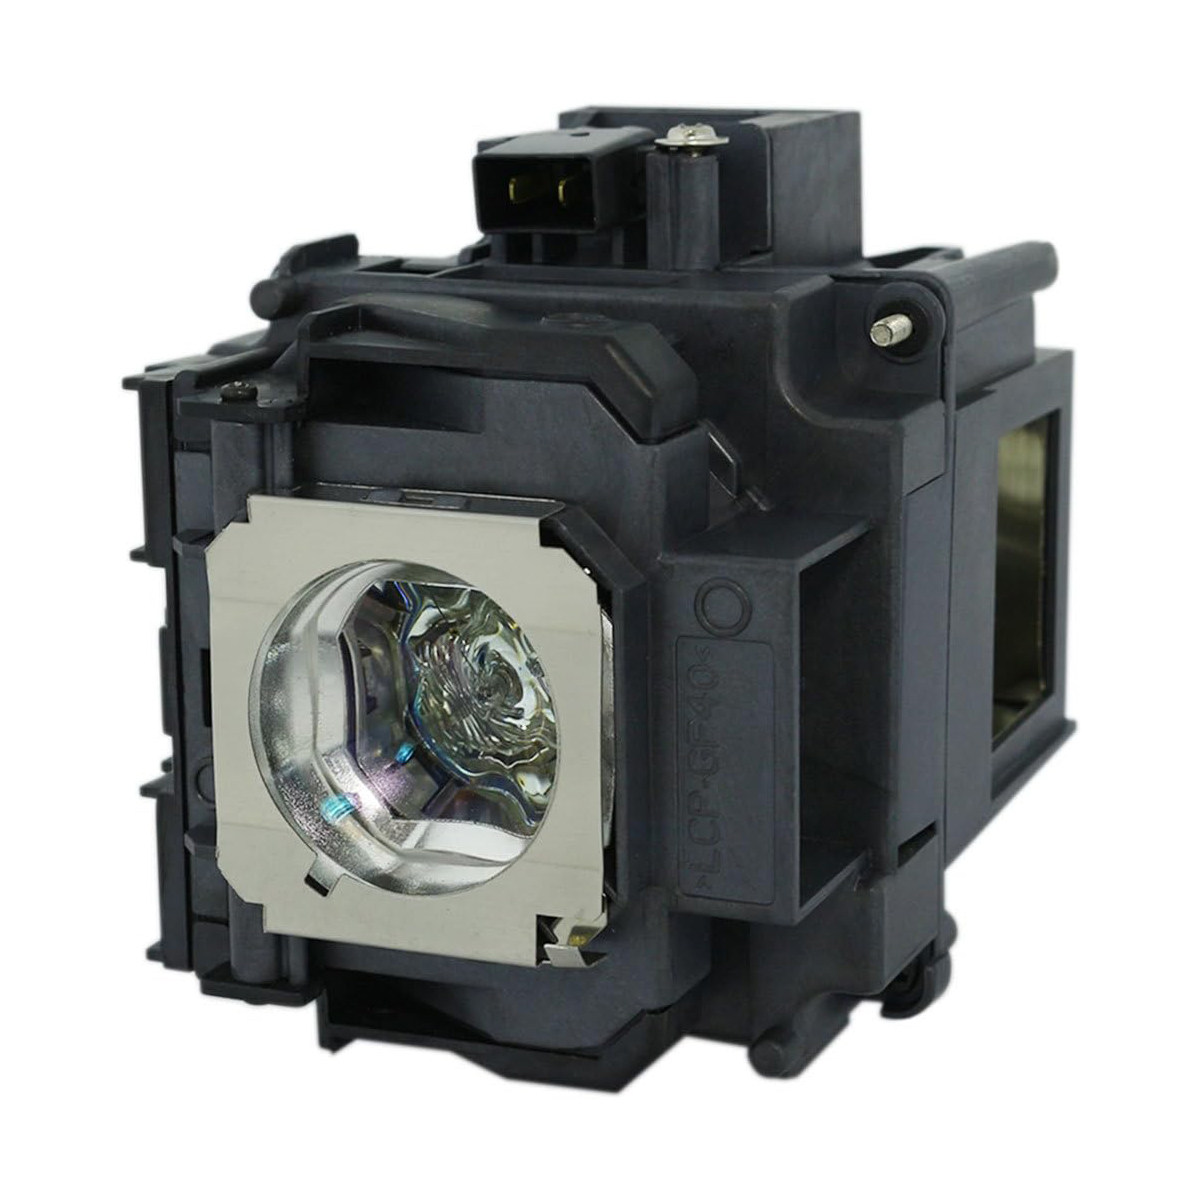 Replacement Projector lamp ELPLP76 For Epson EB-G6050W EB-G6070W EB-G6150 EB-G6170